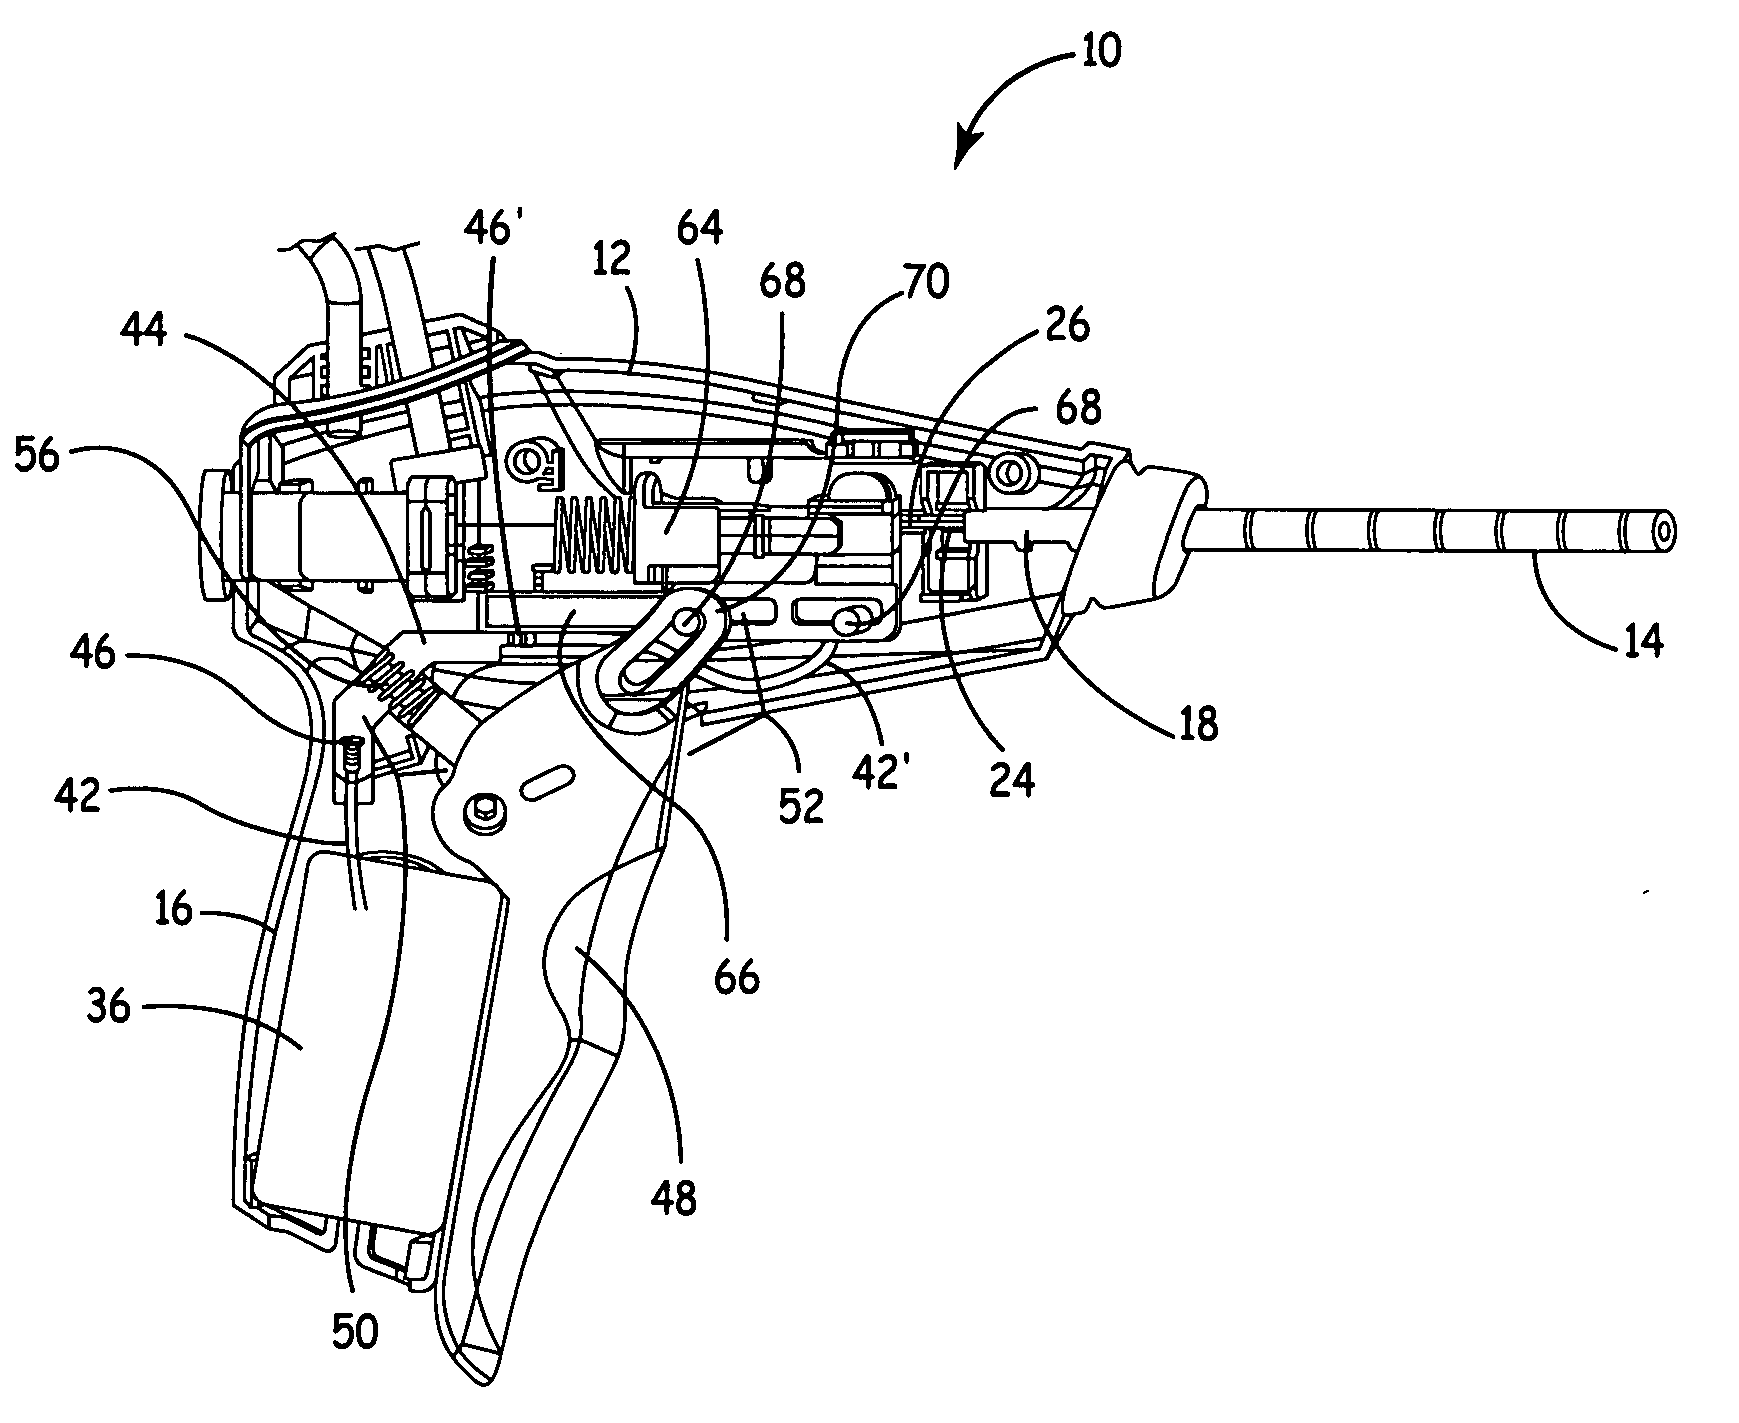 TUNA device with integrated saline resevoir